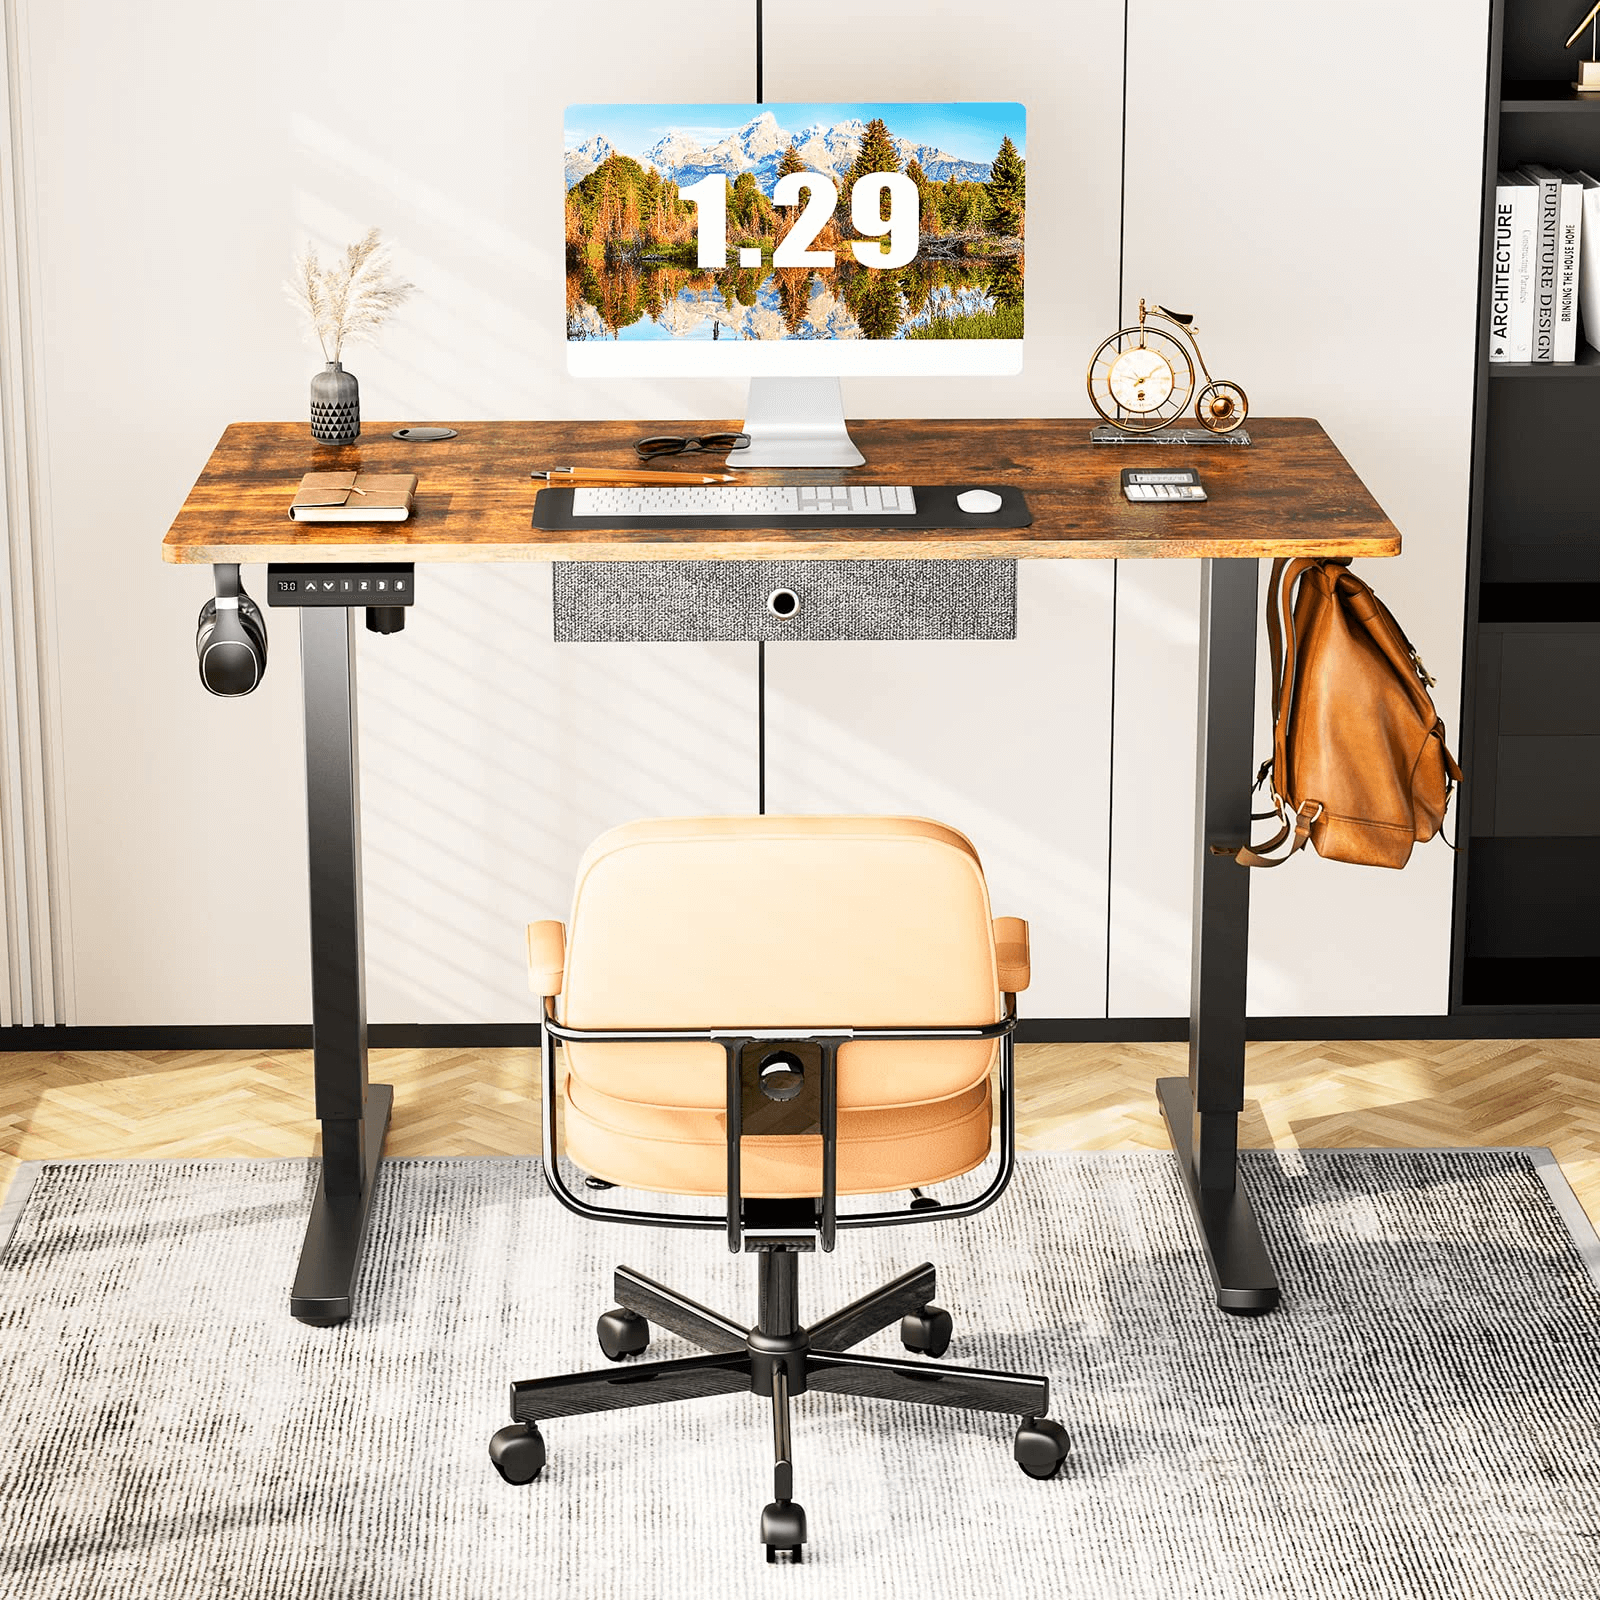 55x24'' Electric Standing Desk Adjustable Height Stand up Desk 27